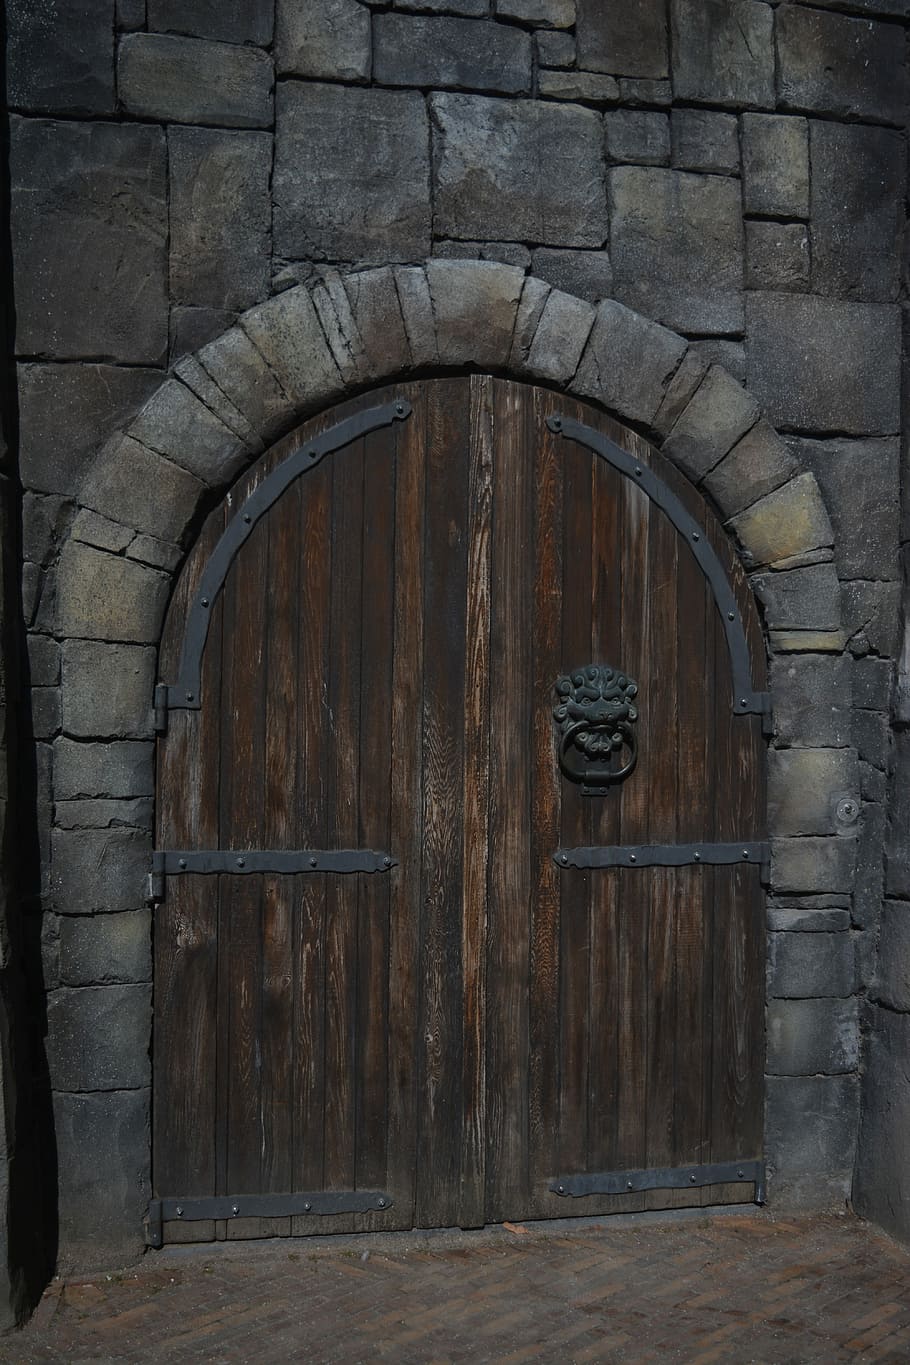 Door, Gate, Castle, Entrance, Doorway, ancient, antique, wood - material, history, protection